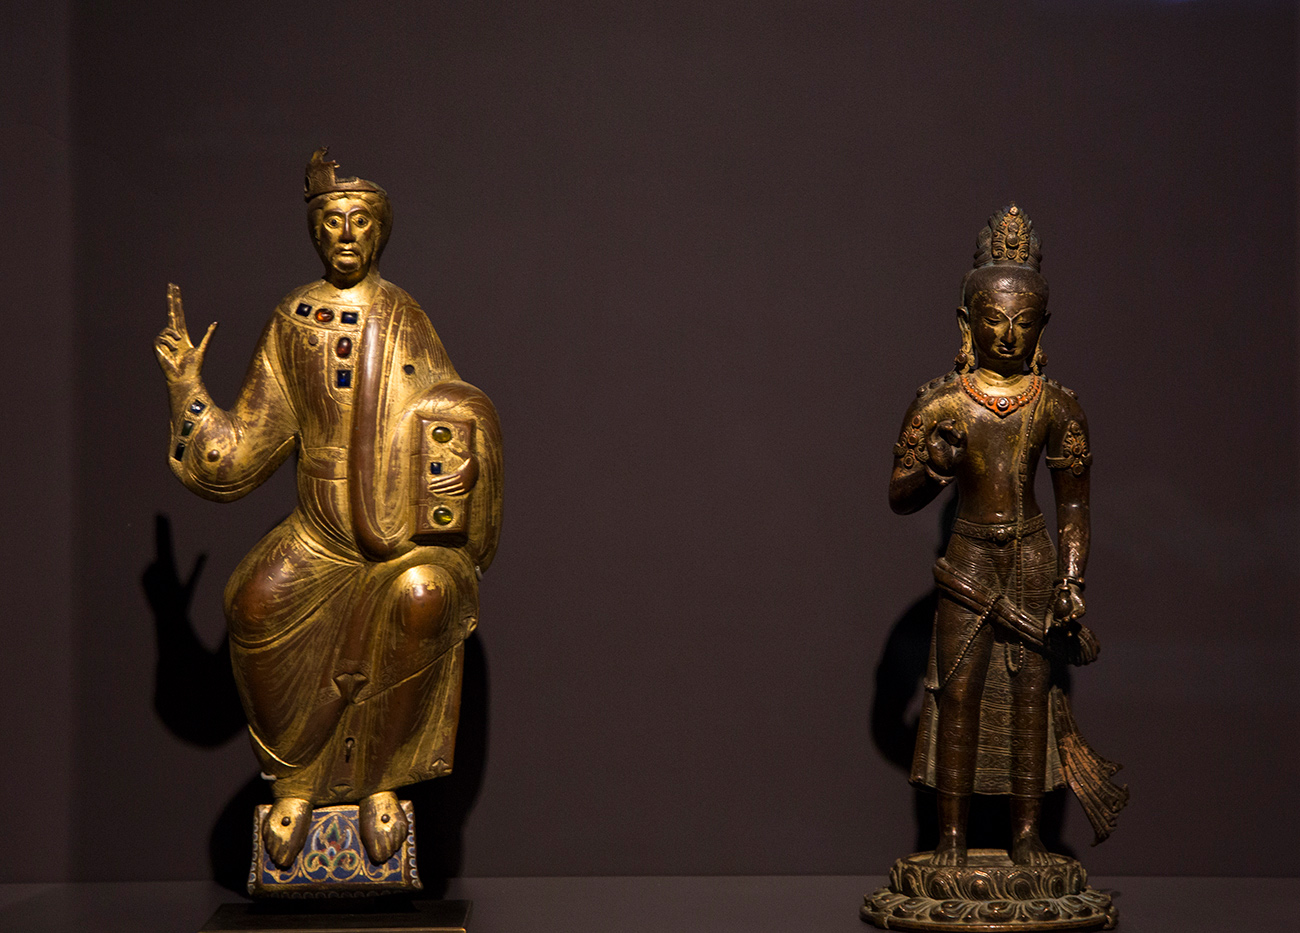 Two small metal devotional sculptures side by side in case, both with their right arms raised in blessing